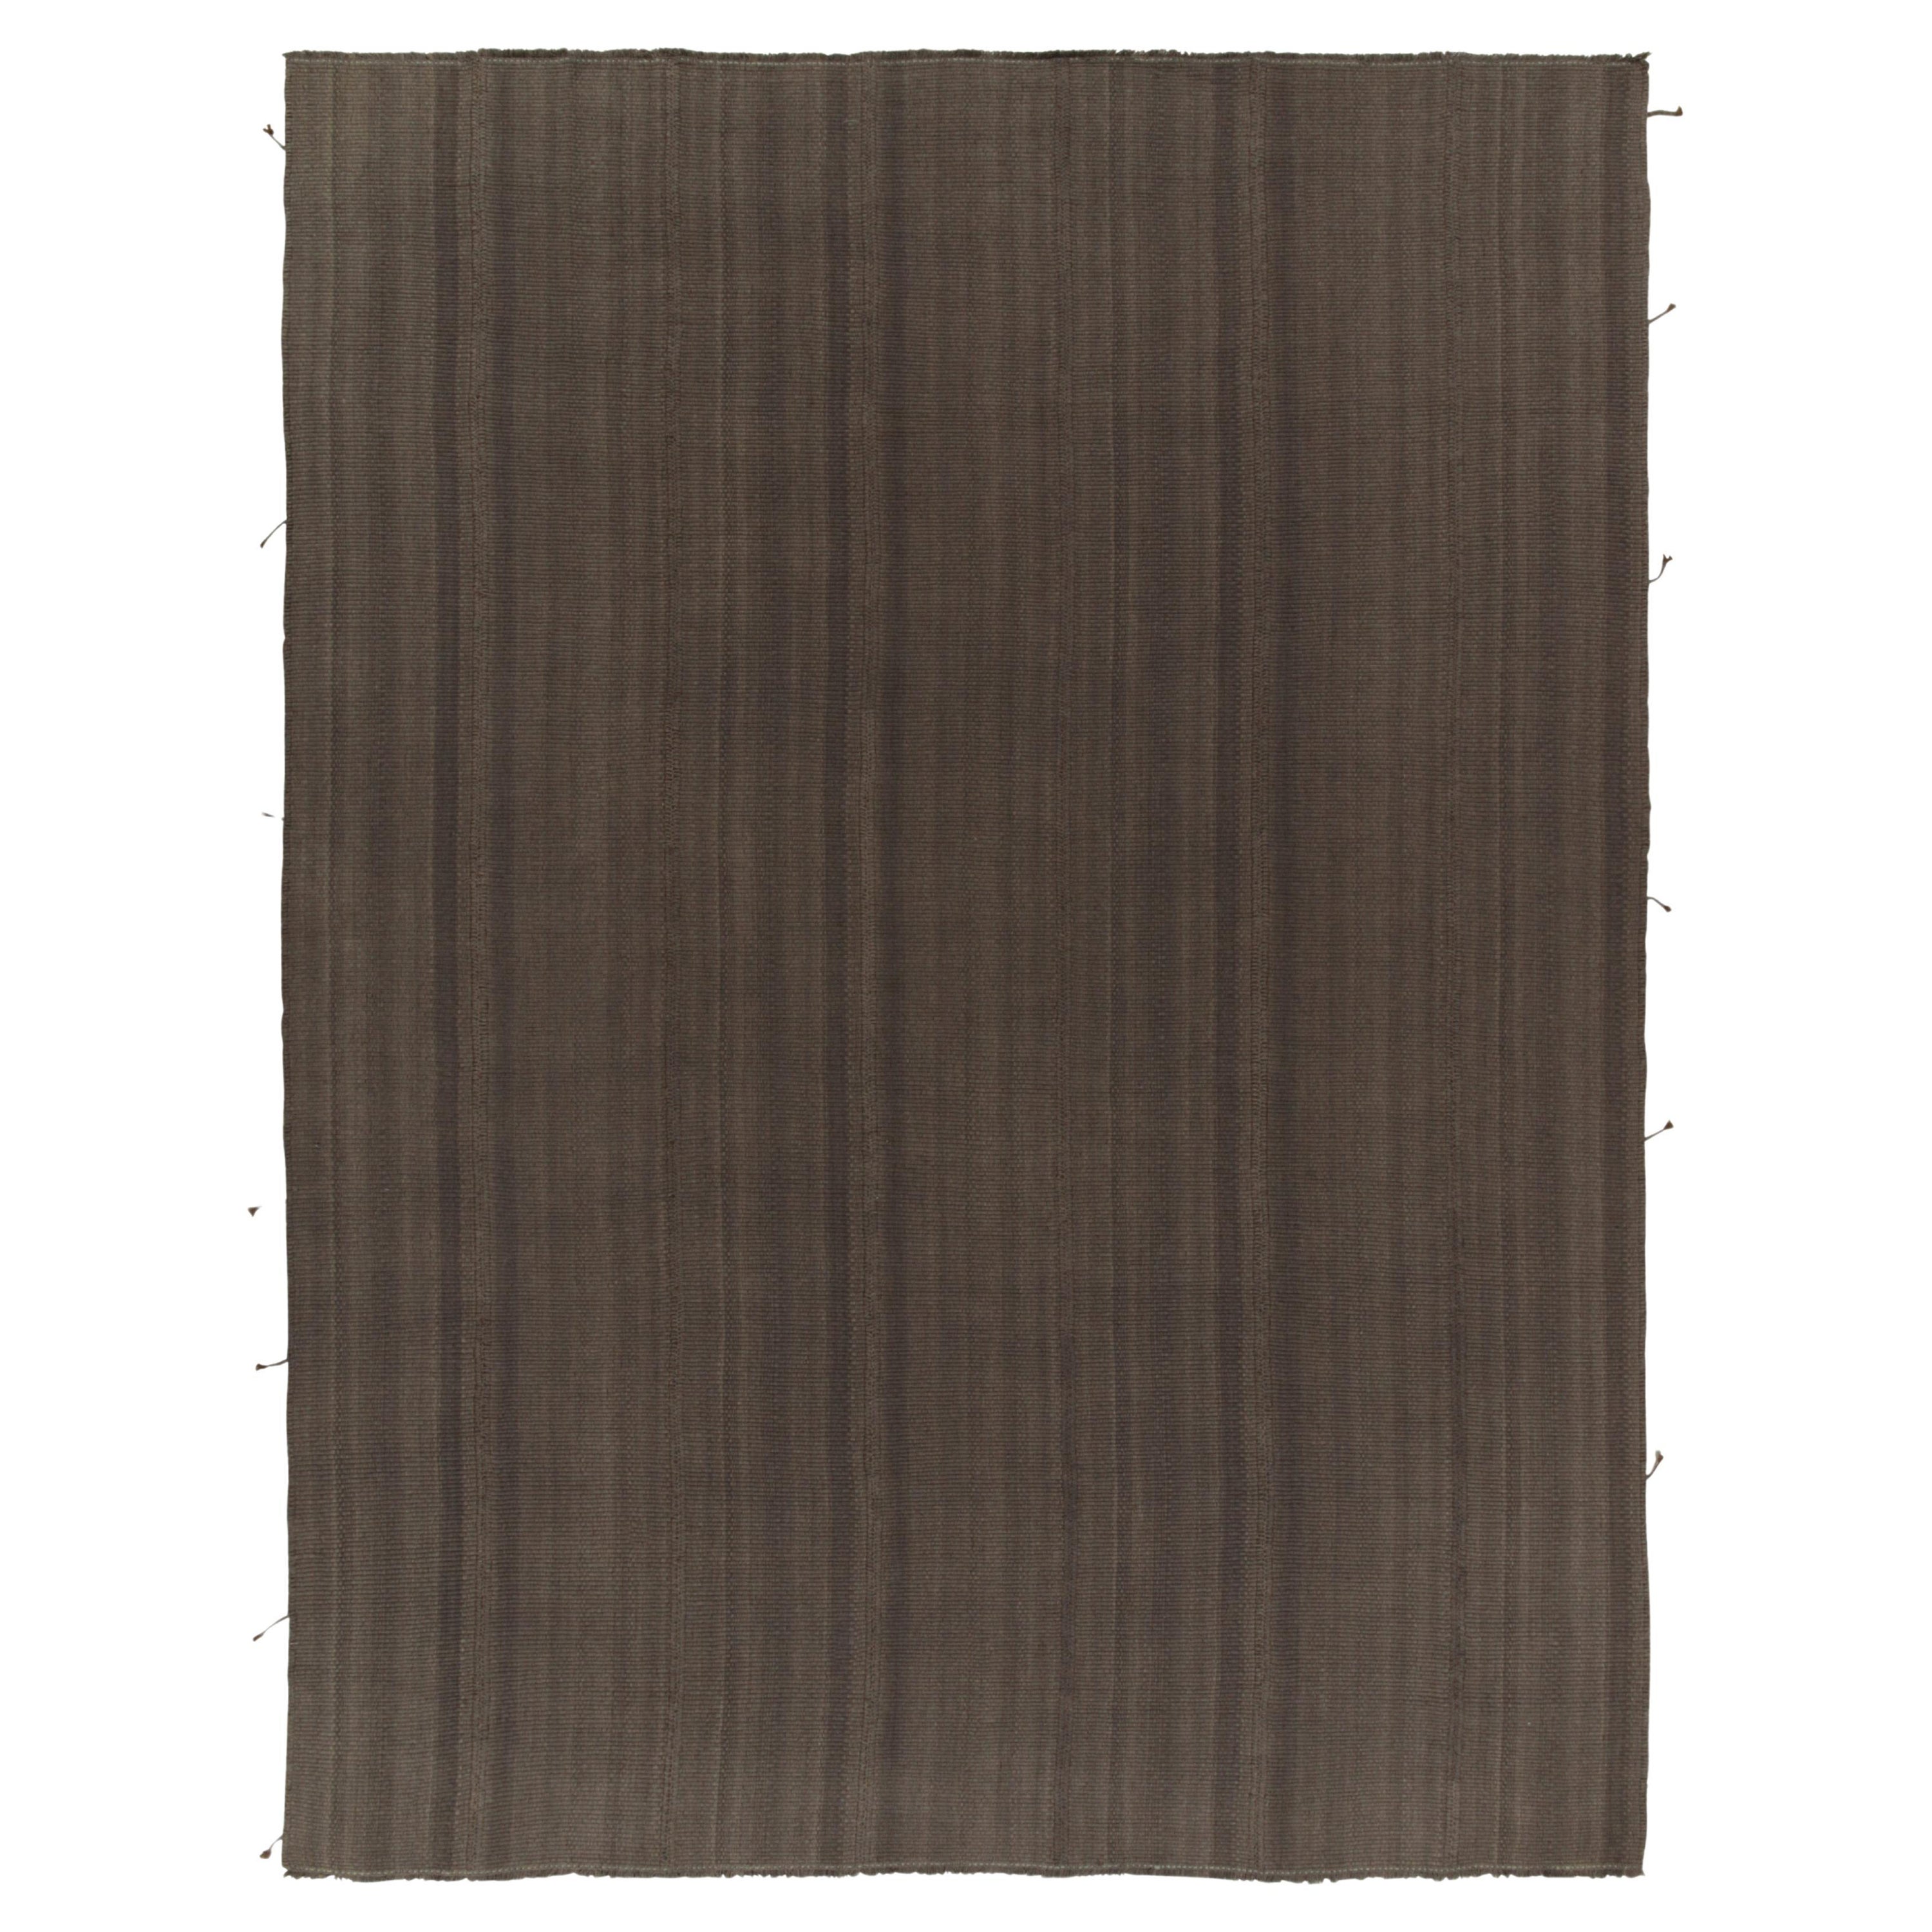 Rug & Kilim’s Contemporary Kilims in Muted Brown Stripes, Panel Woven style For Sale